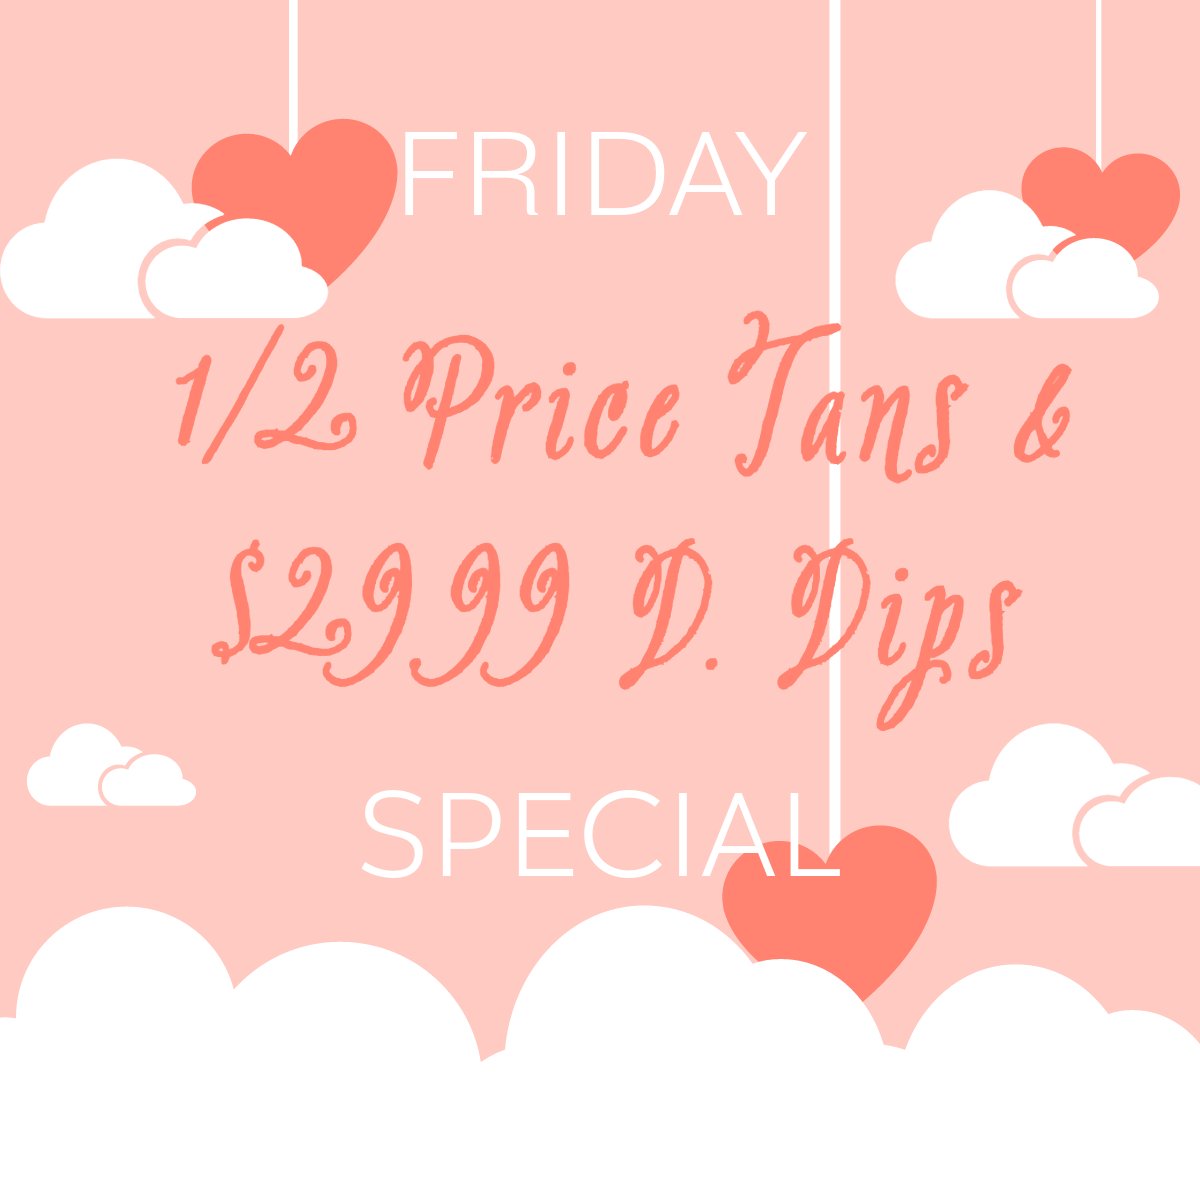 Get ready for your weekend! #happytanning#fridayspecial#fridayvibes